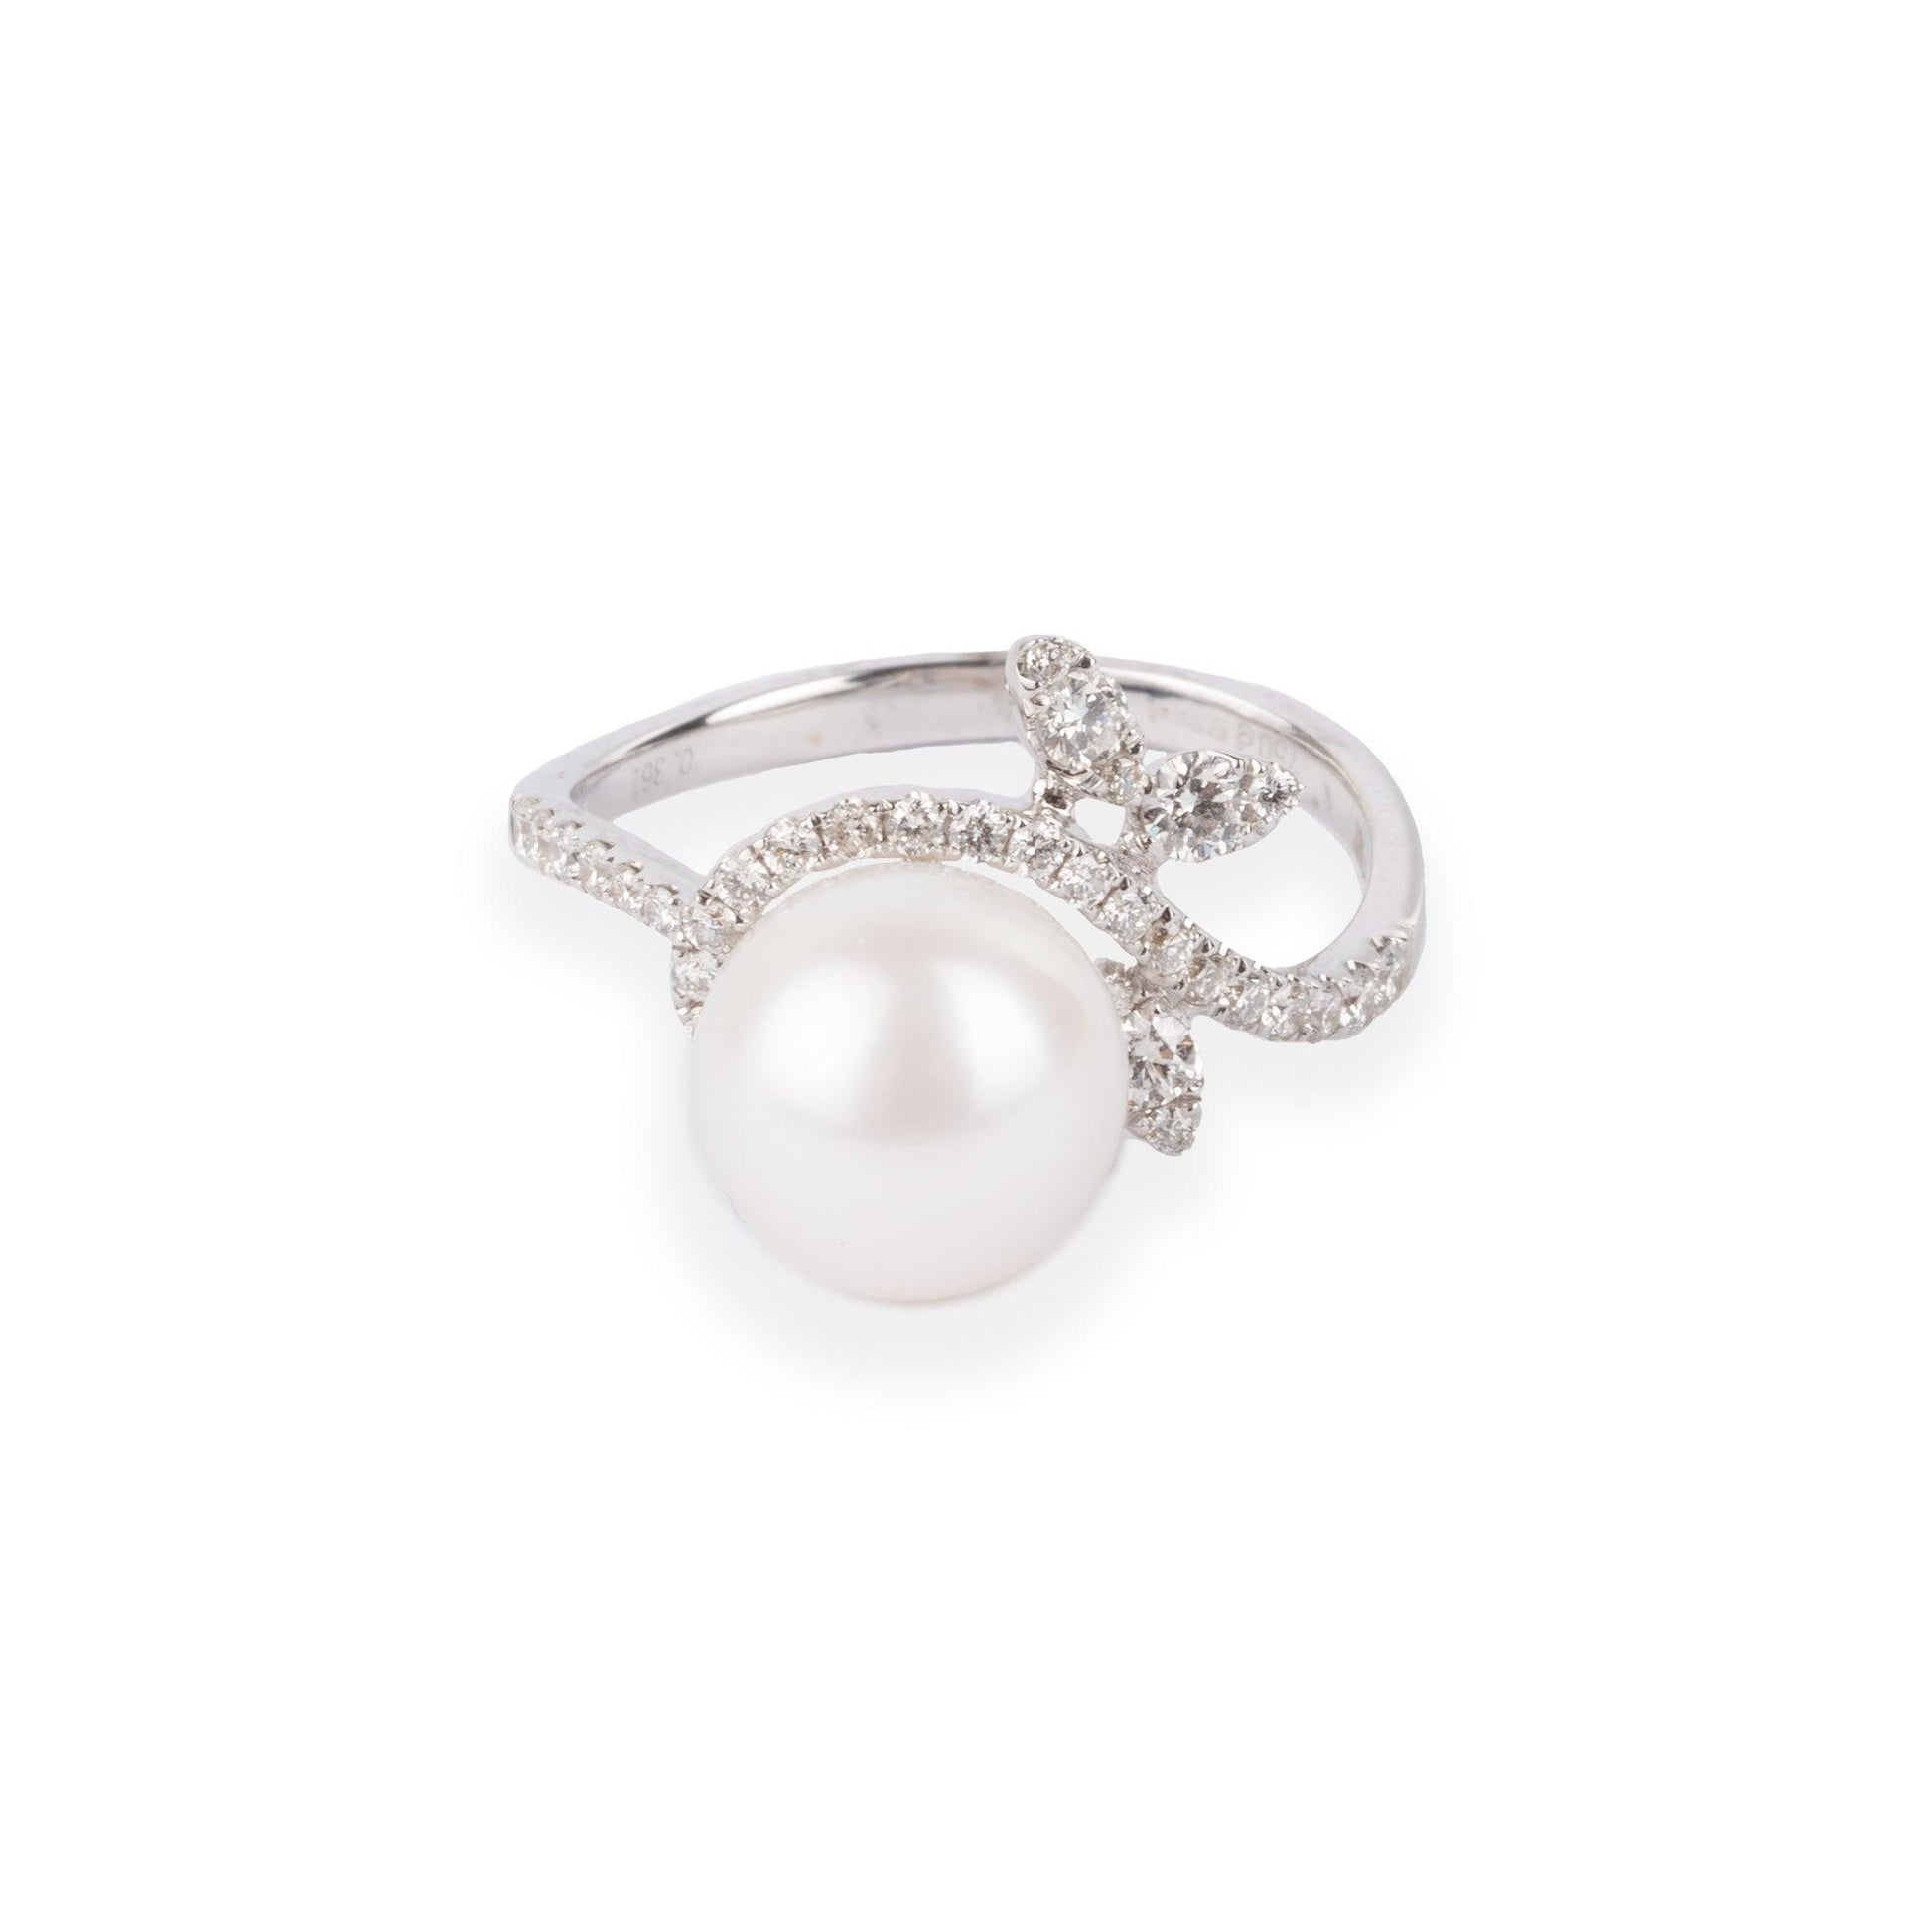 18ct White Gold Diamond & Cultured Pearl Dress Ring A-R35726-3000 - Minar Jewellers